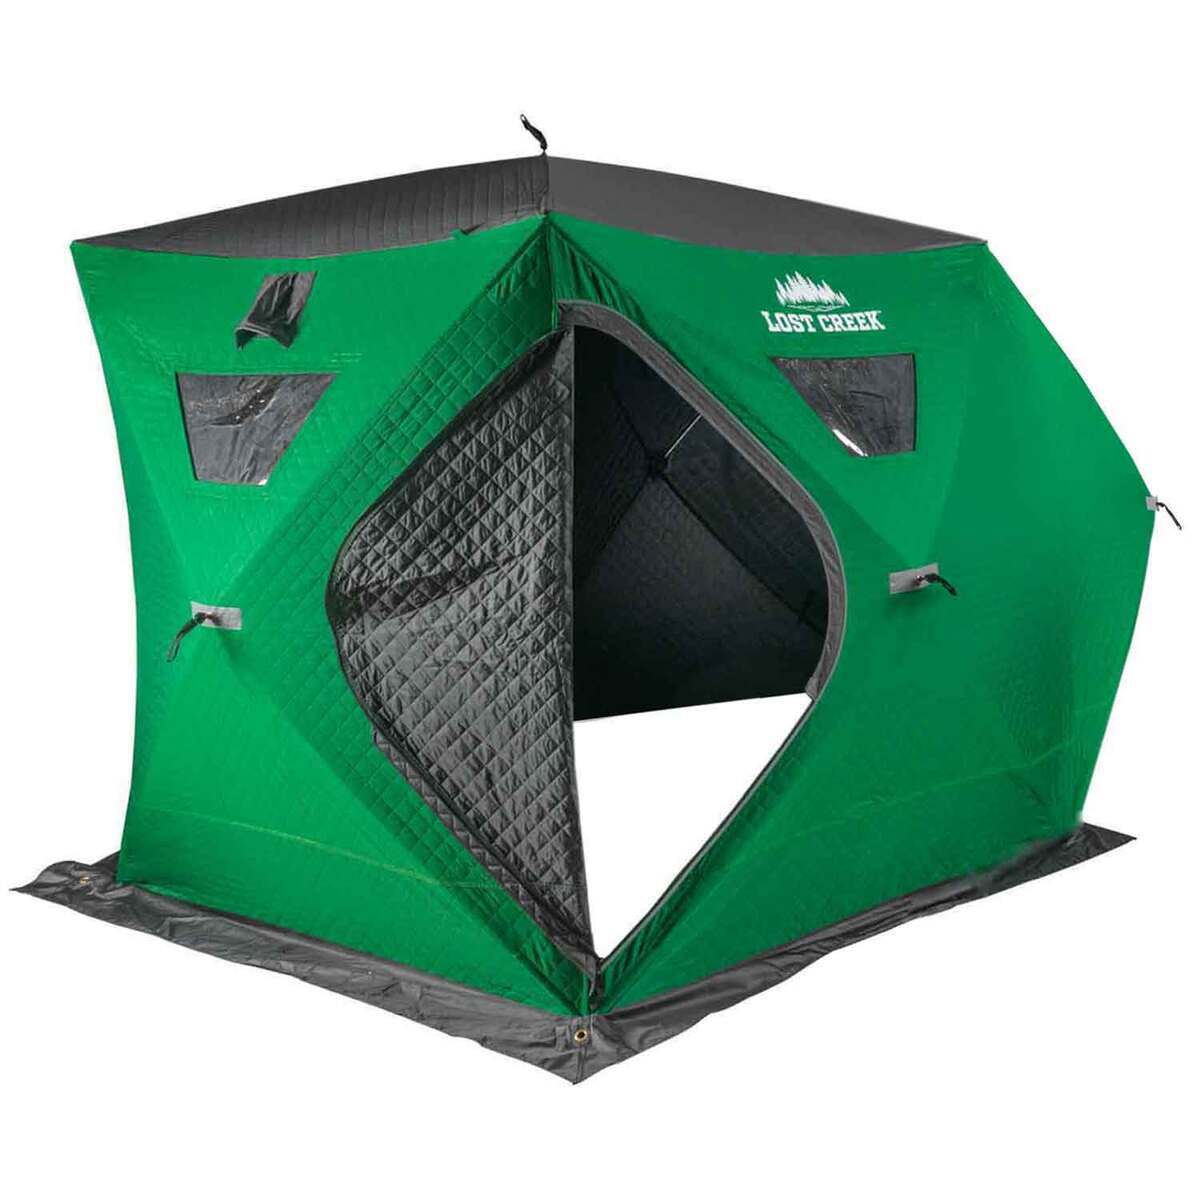 Lost Creek Gale Force 6-Man Thermal Hub Ice Fishing Shelter - Green by Sportsman's Warehouse